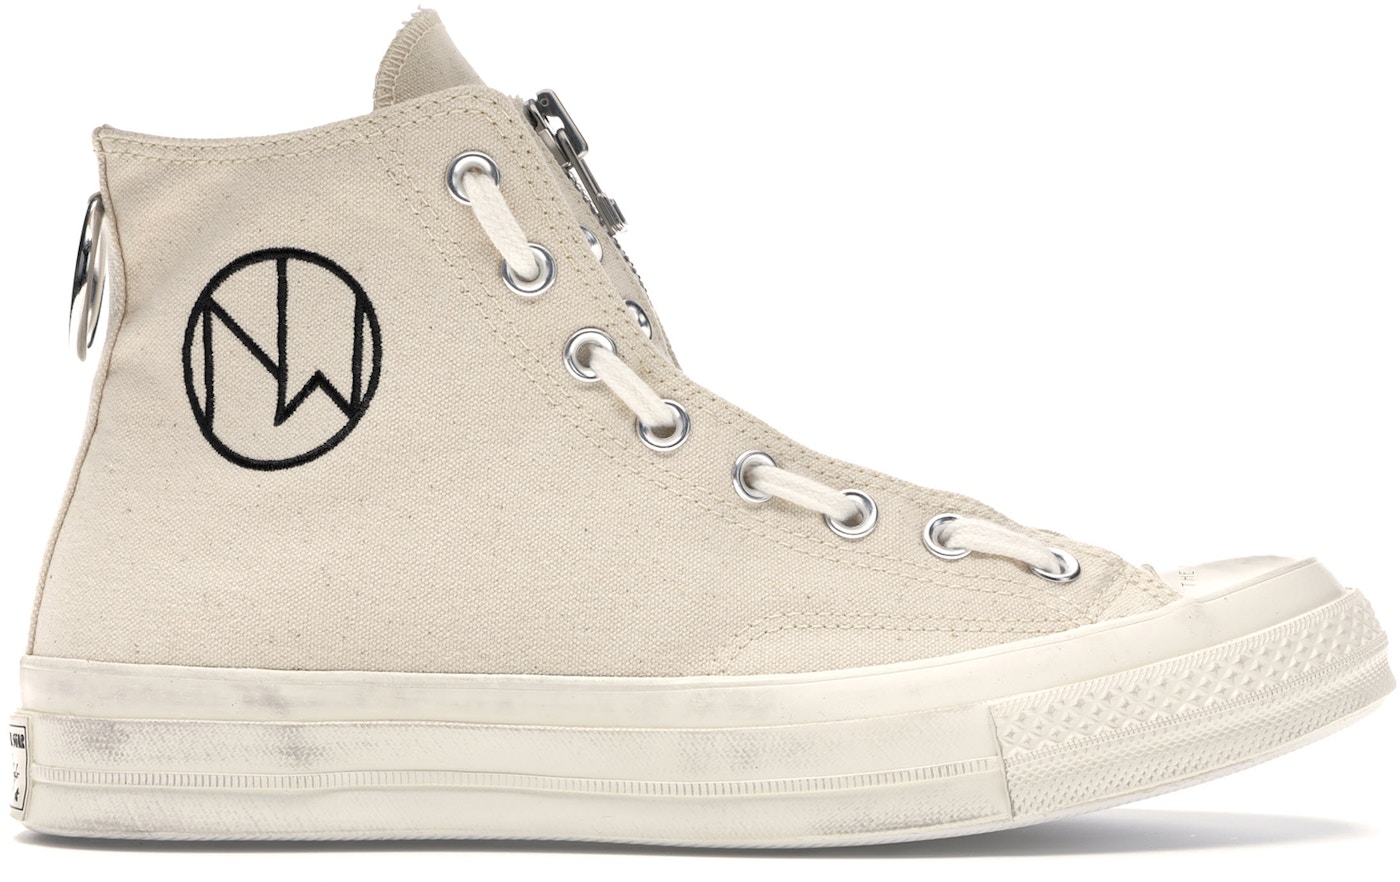 Chuck Taylor All-Star 70s Undercover New Warriors White - 164832C